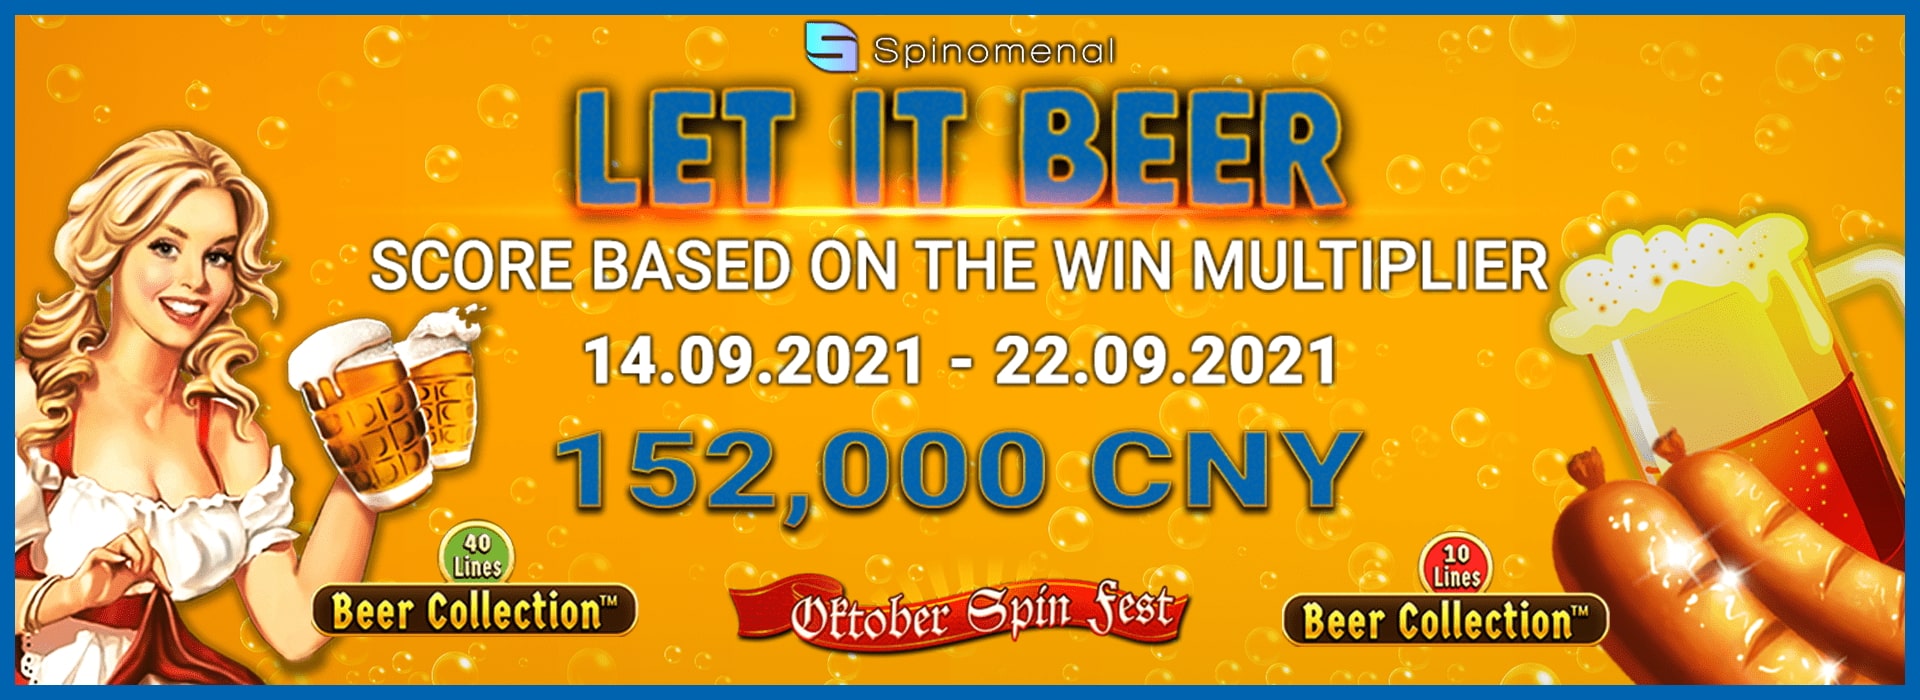 Spinomenal - Let it BEER Tournament